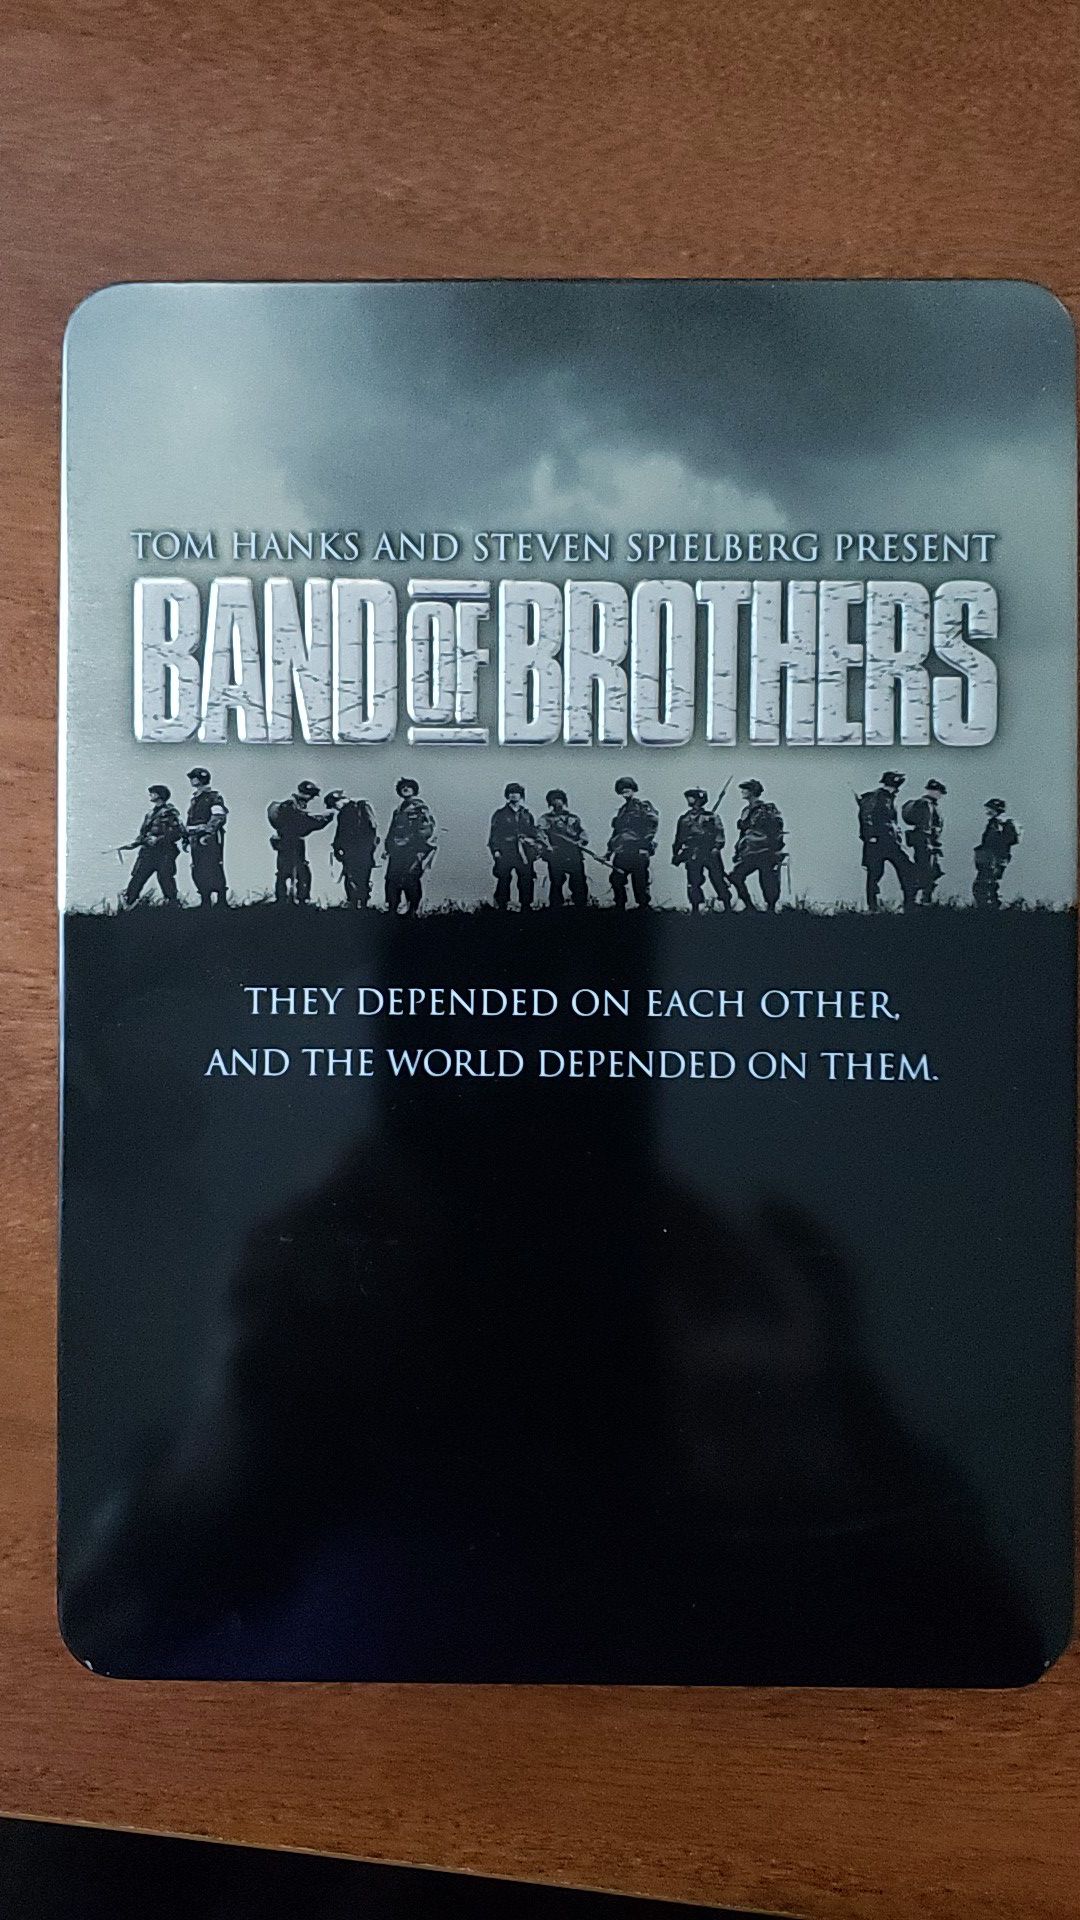 Band of Brothers DVD set